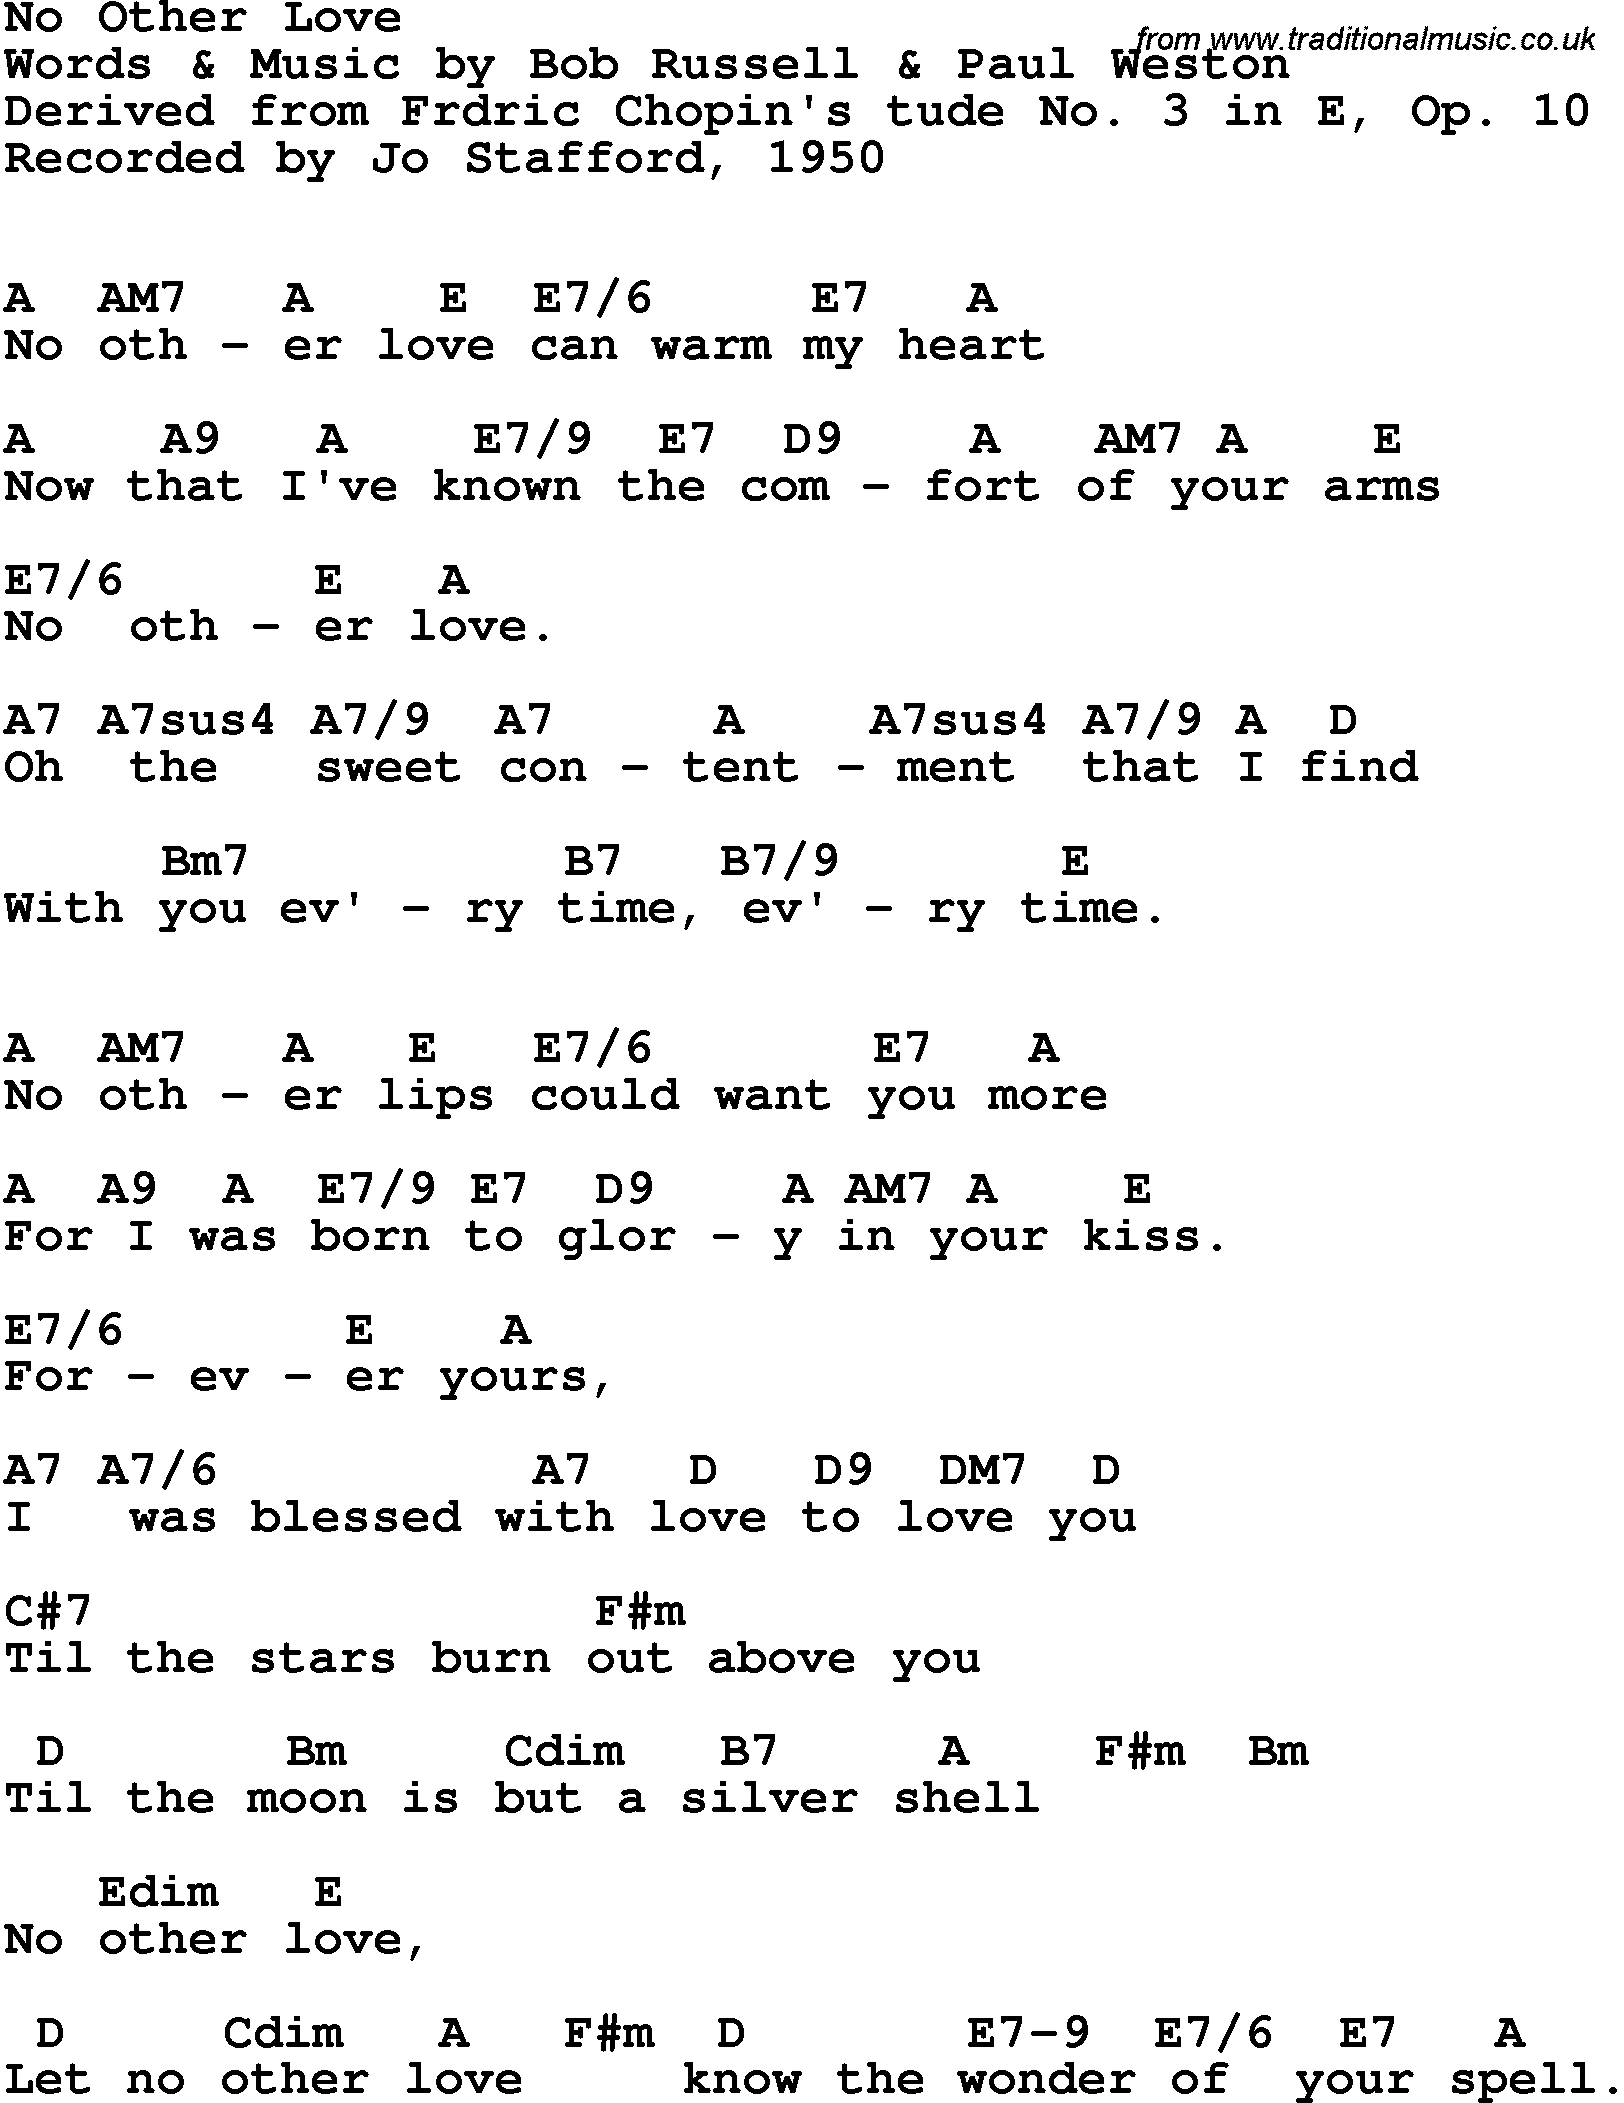 Song Lyrics with guitar chords for No Other Love - Jo Stafford, 1950